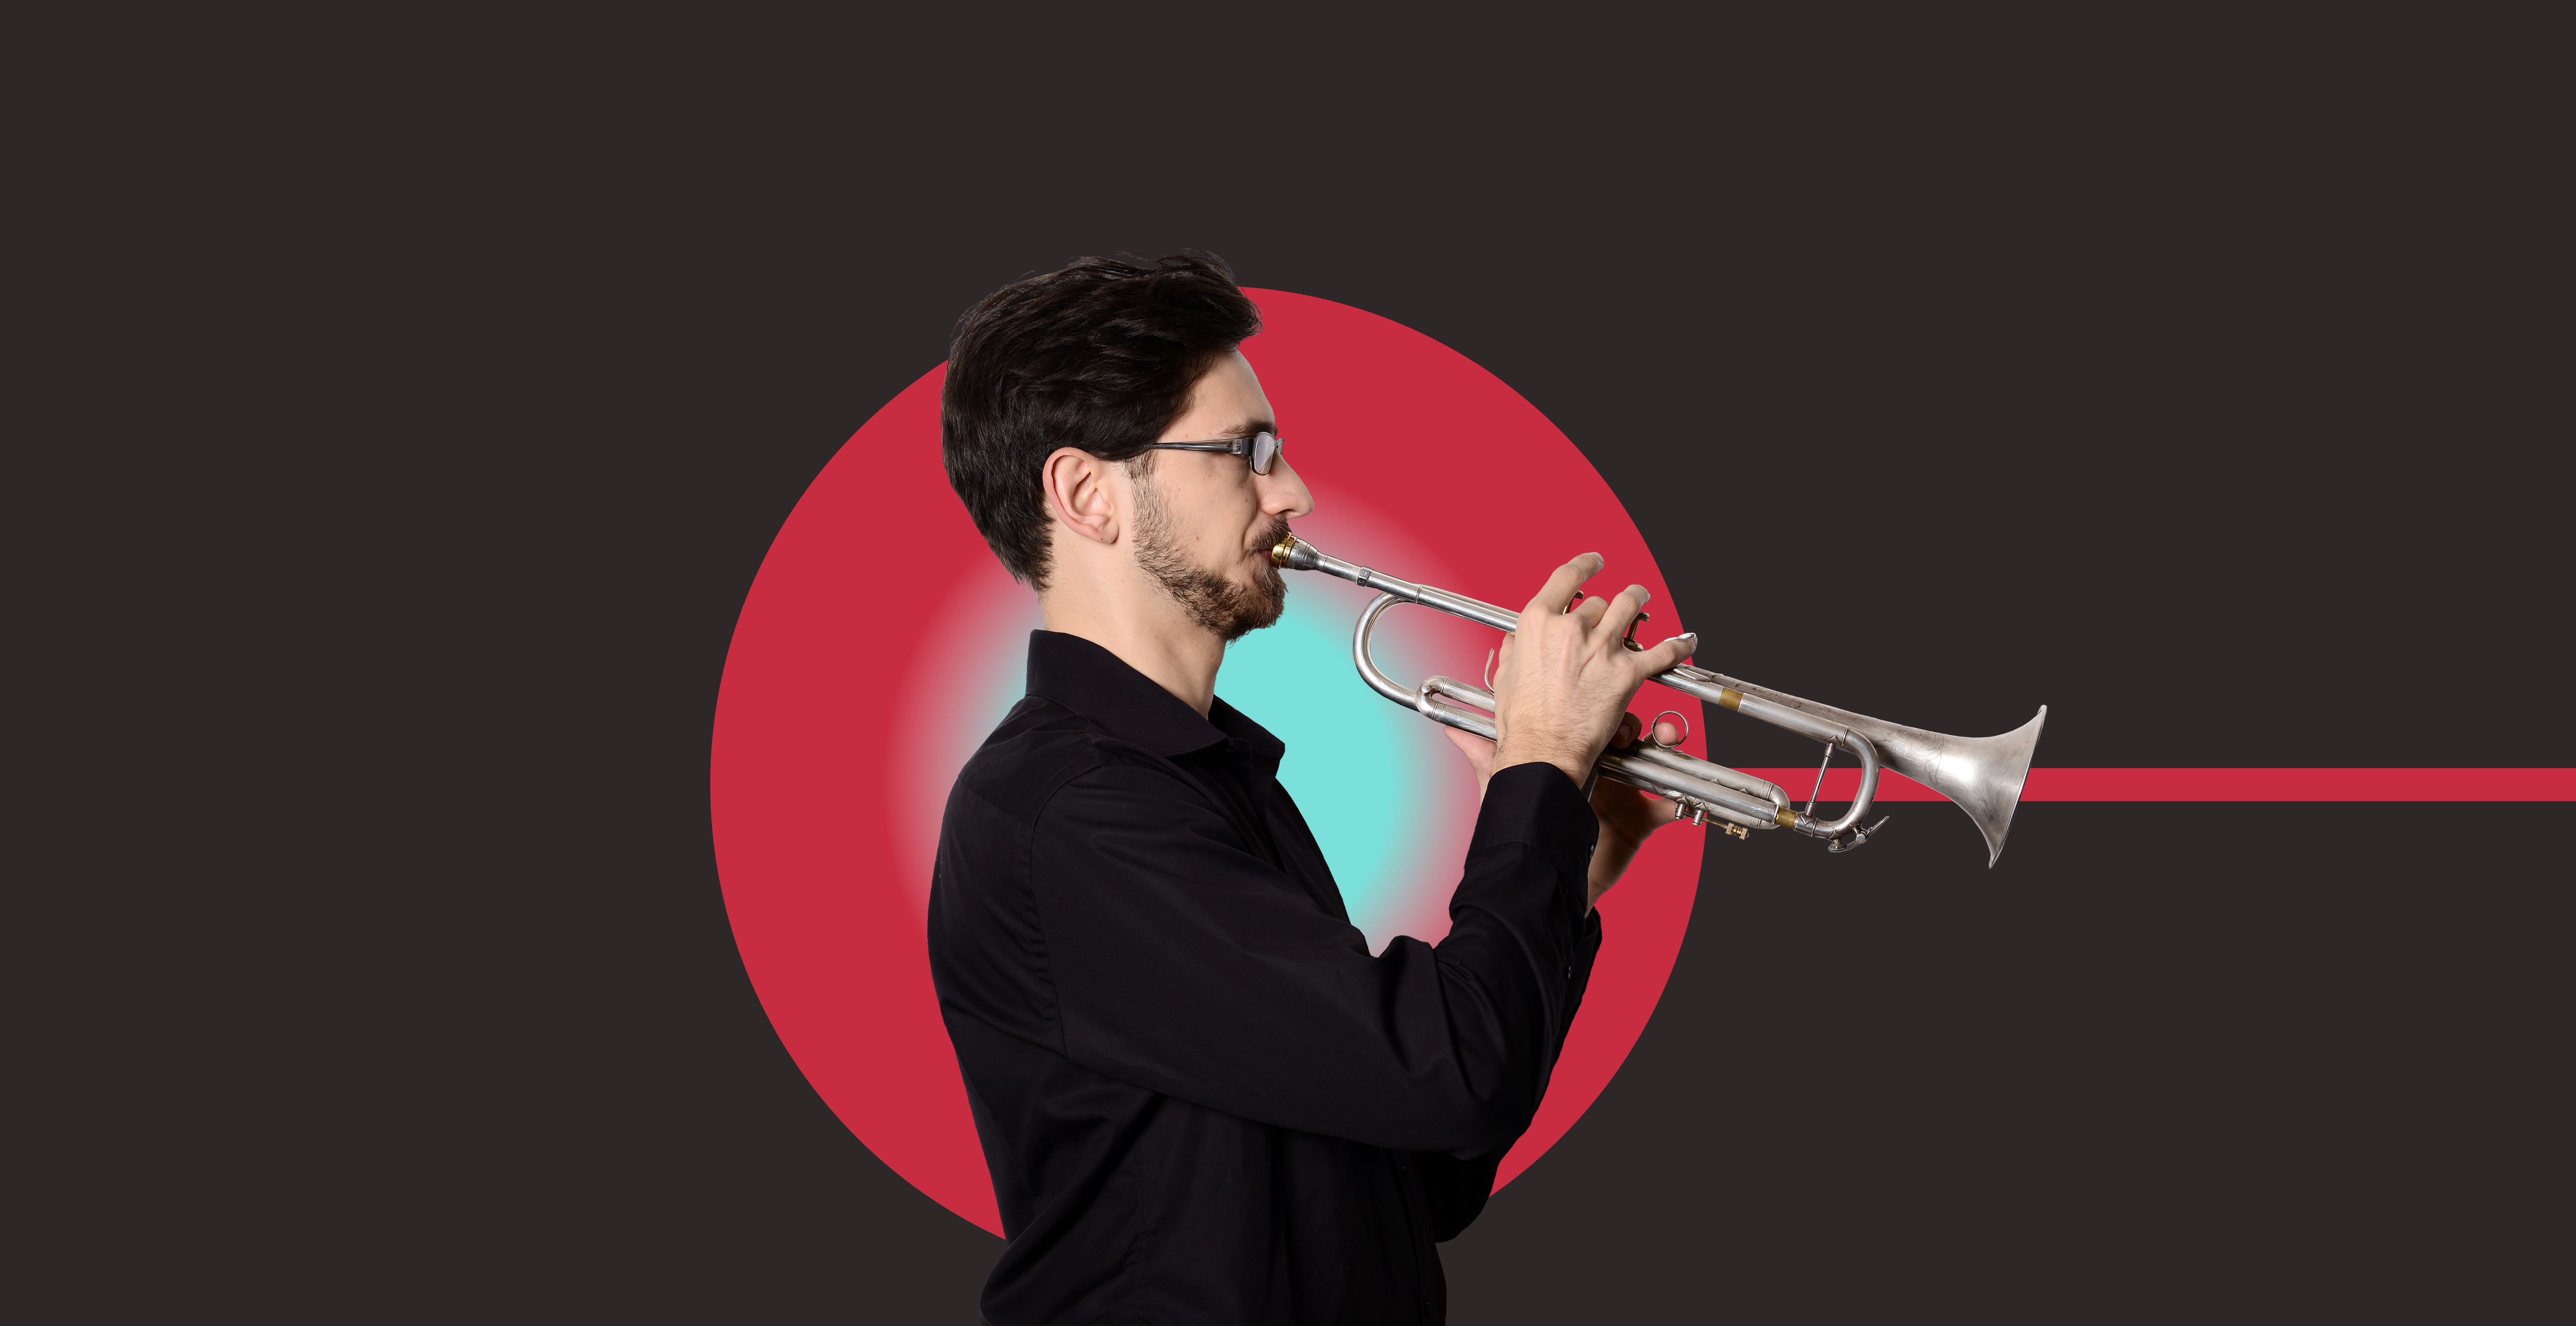 Ruben Giannotti in profile view playing the trumpet with glitch effect